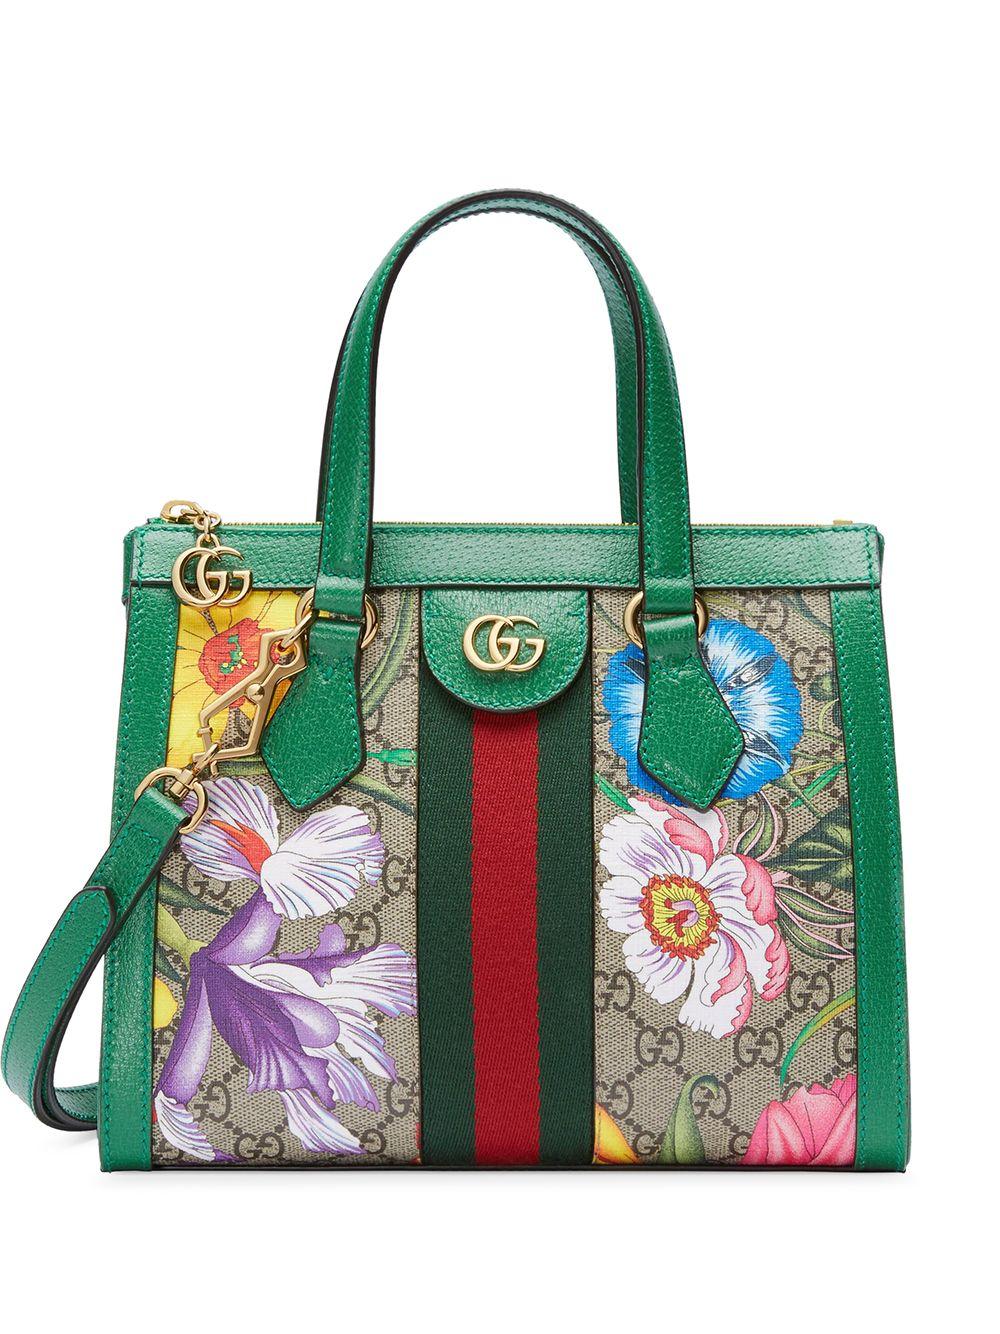 Gucci Canvas Ophidia Floral Pattern Tote Bag in Green - Lyst